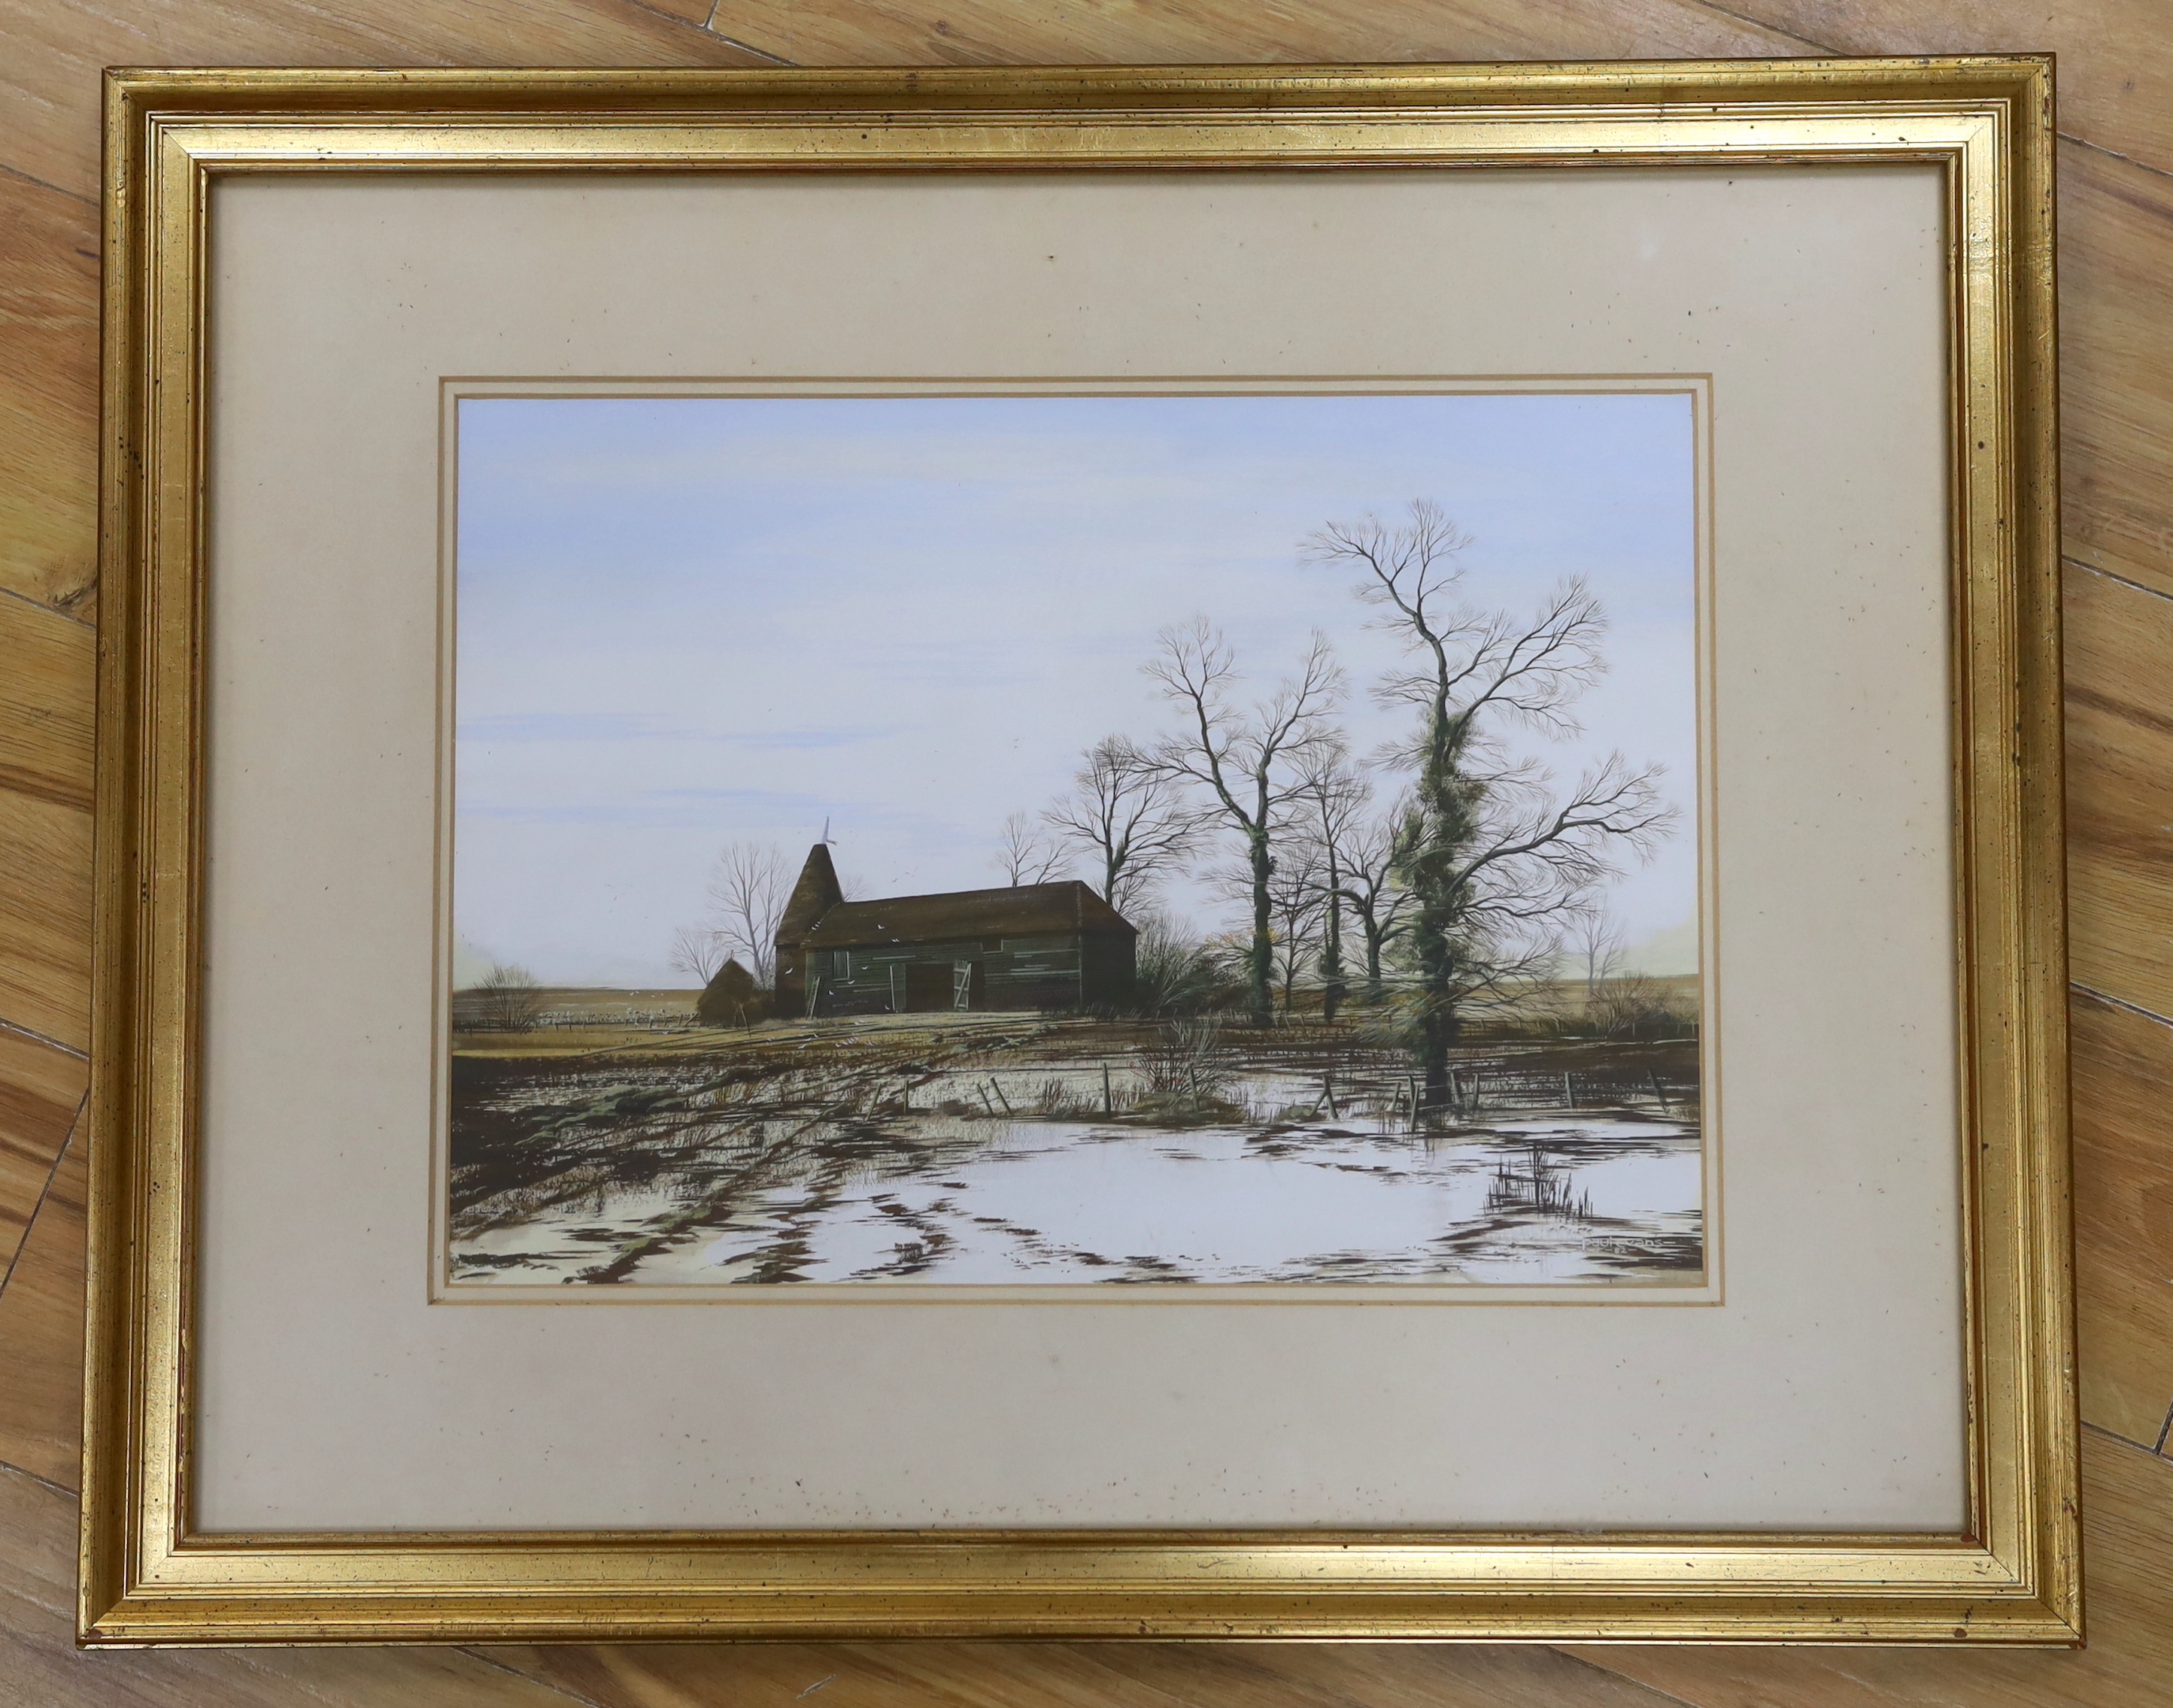 Paul Evans (b. 1950) gouache, Oast house in winter landscape, signed and dated 1982, 49cm x 35cm